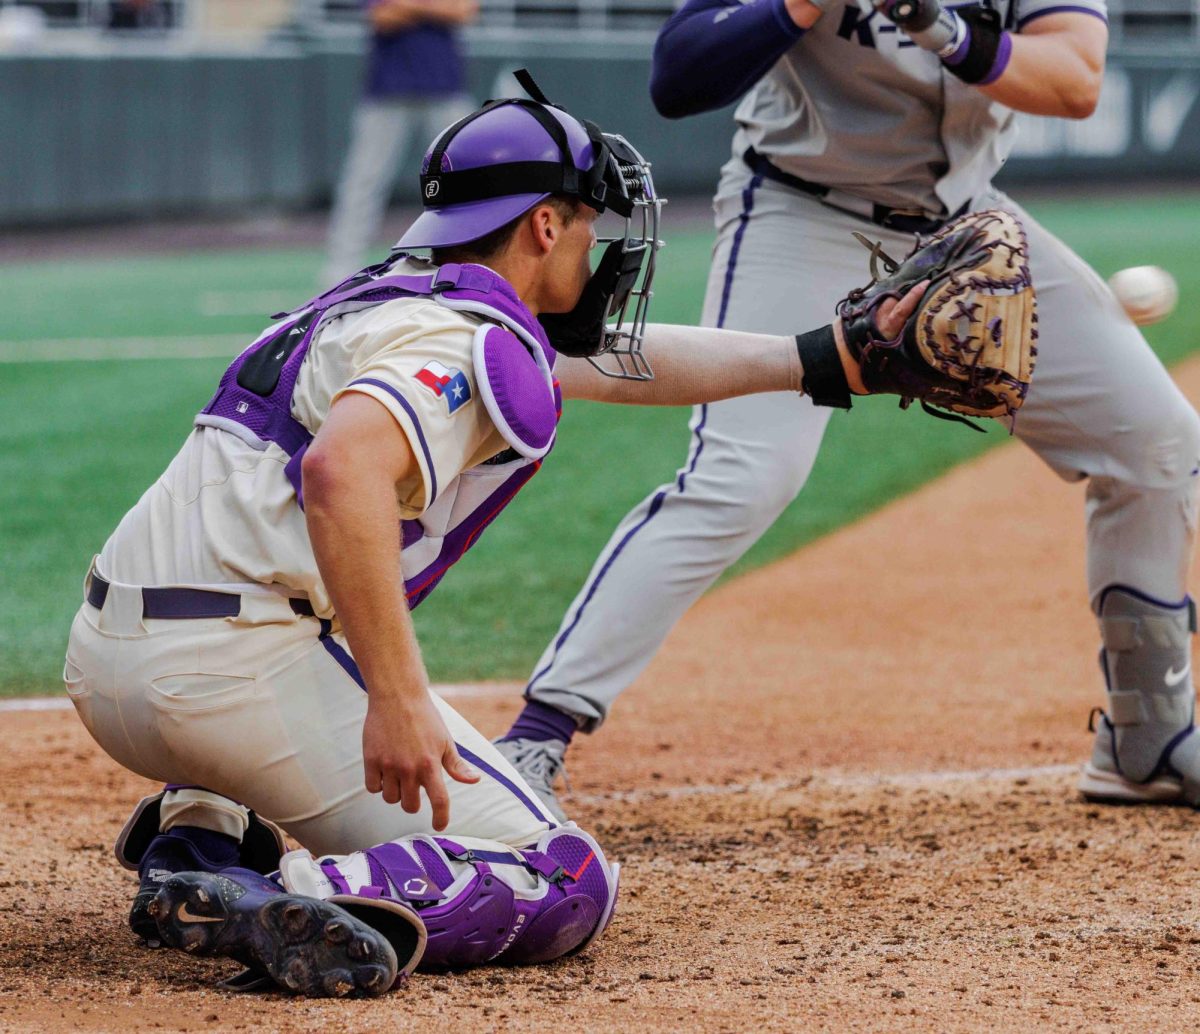 TCU catcher Kurtis Byrne receives the pitch at Lupton Stadium in Fort Worth, Texas on April 27th, 2024. The TCU Horned Frogs fell to the Kansas State Wildcats 6-3 in game 2 of the doubleheader. (TCU360/Tyler Chan)